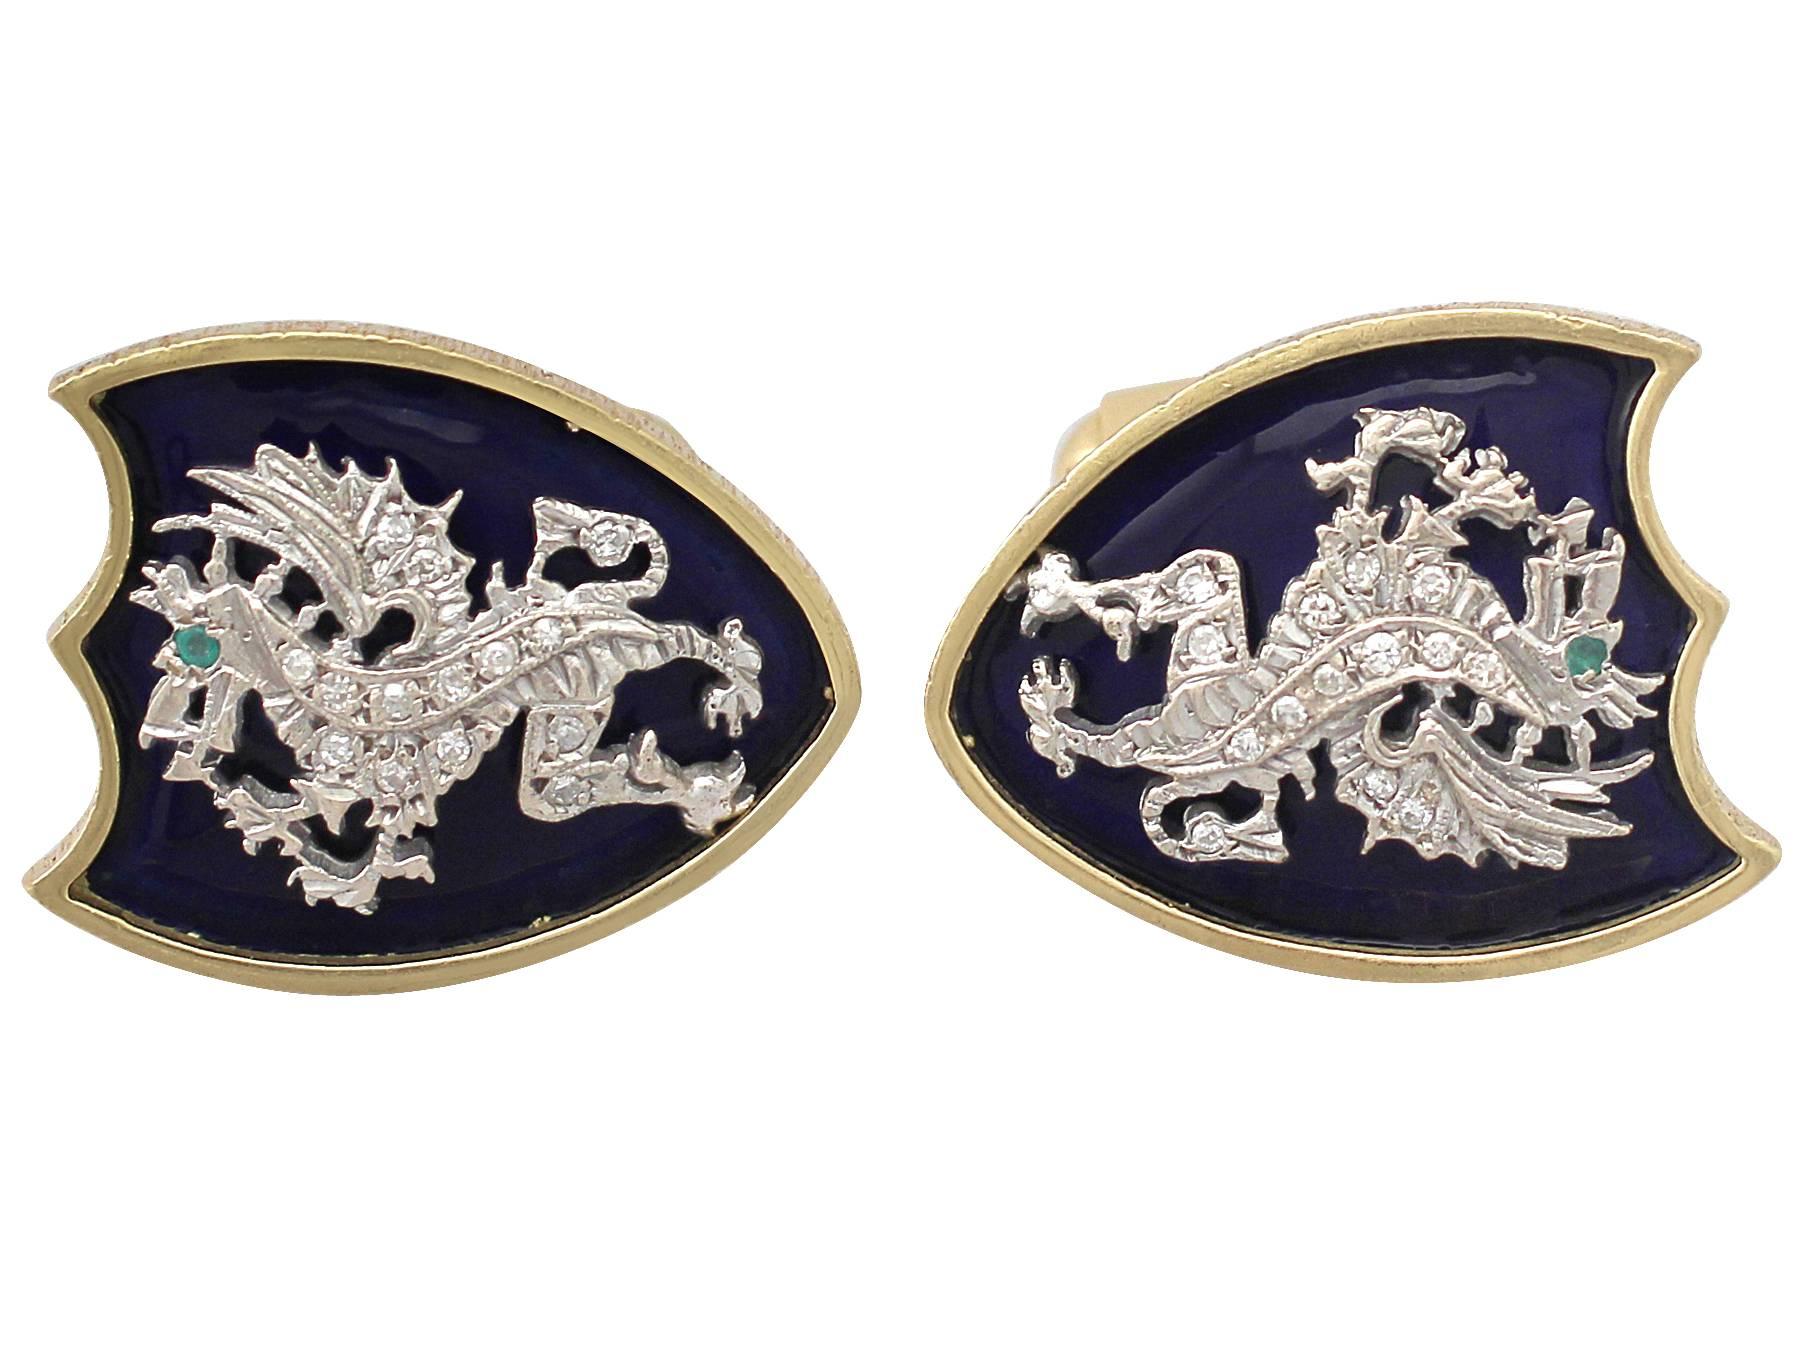 A stunning, fine and impressive pair of vintage 0.35 carat diamond and 0.03 carat natural emerald, enamel and 18 karat yellow gold cufflinks with an 18 karat white gold heraldic dragon motif; part of our diverse collection of English jewelry

These